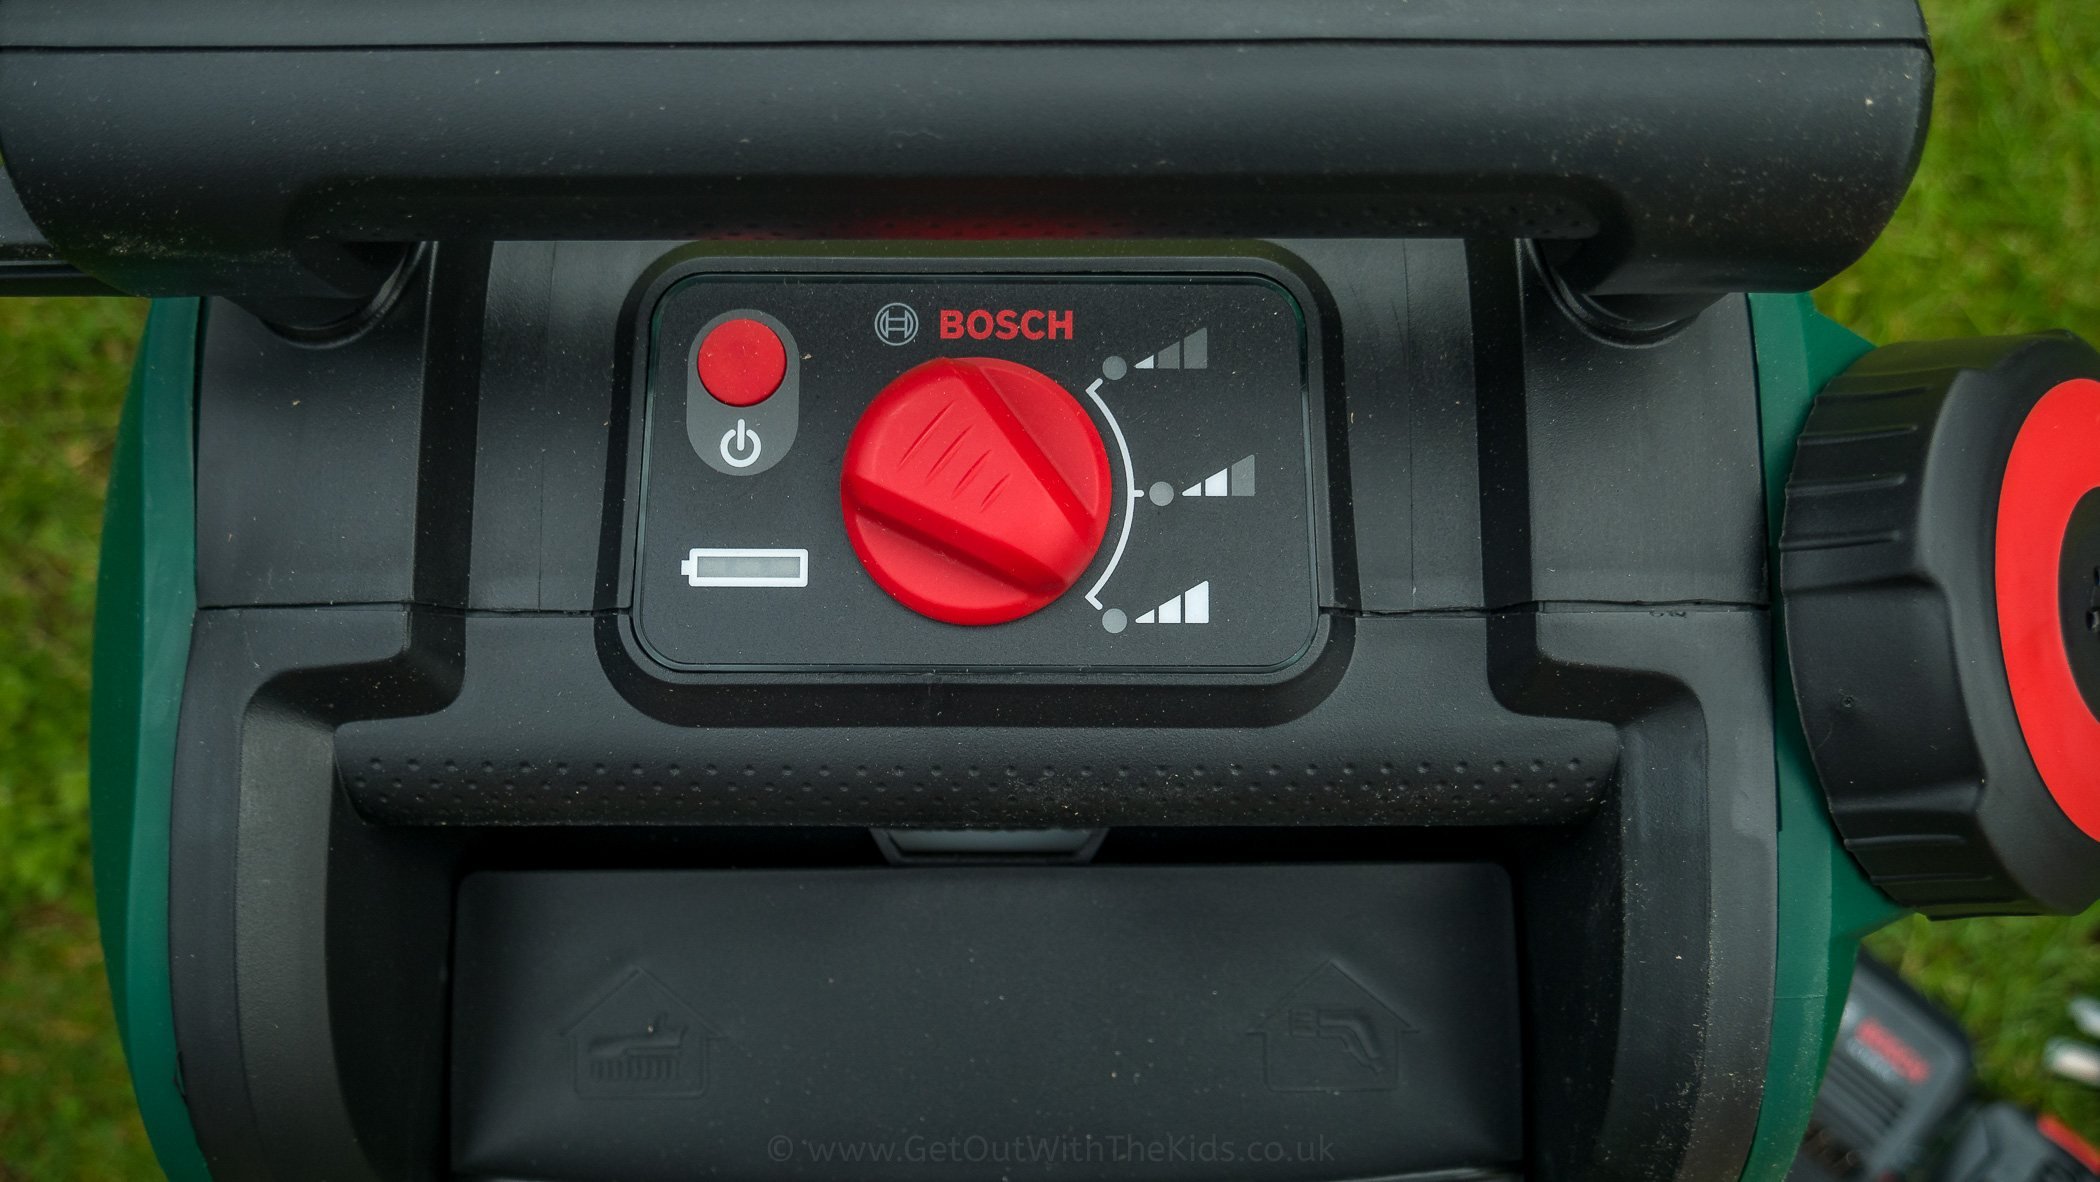 The power settings on the Bosch Fontus